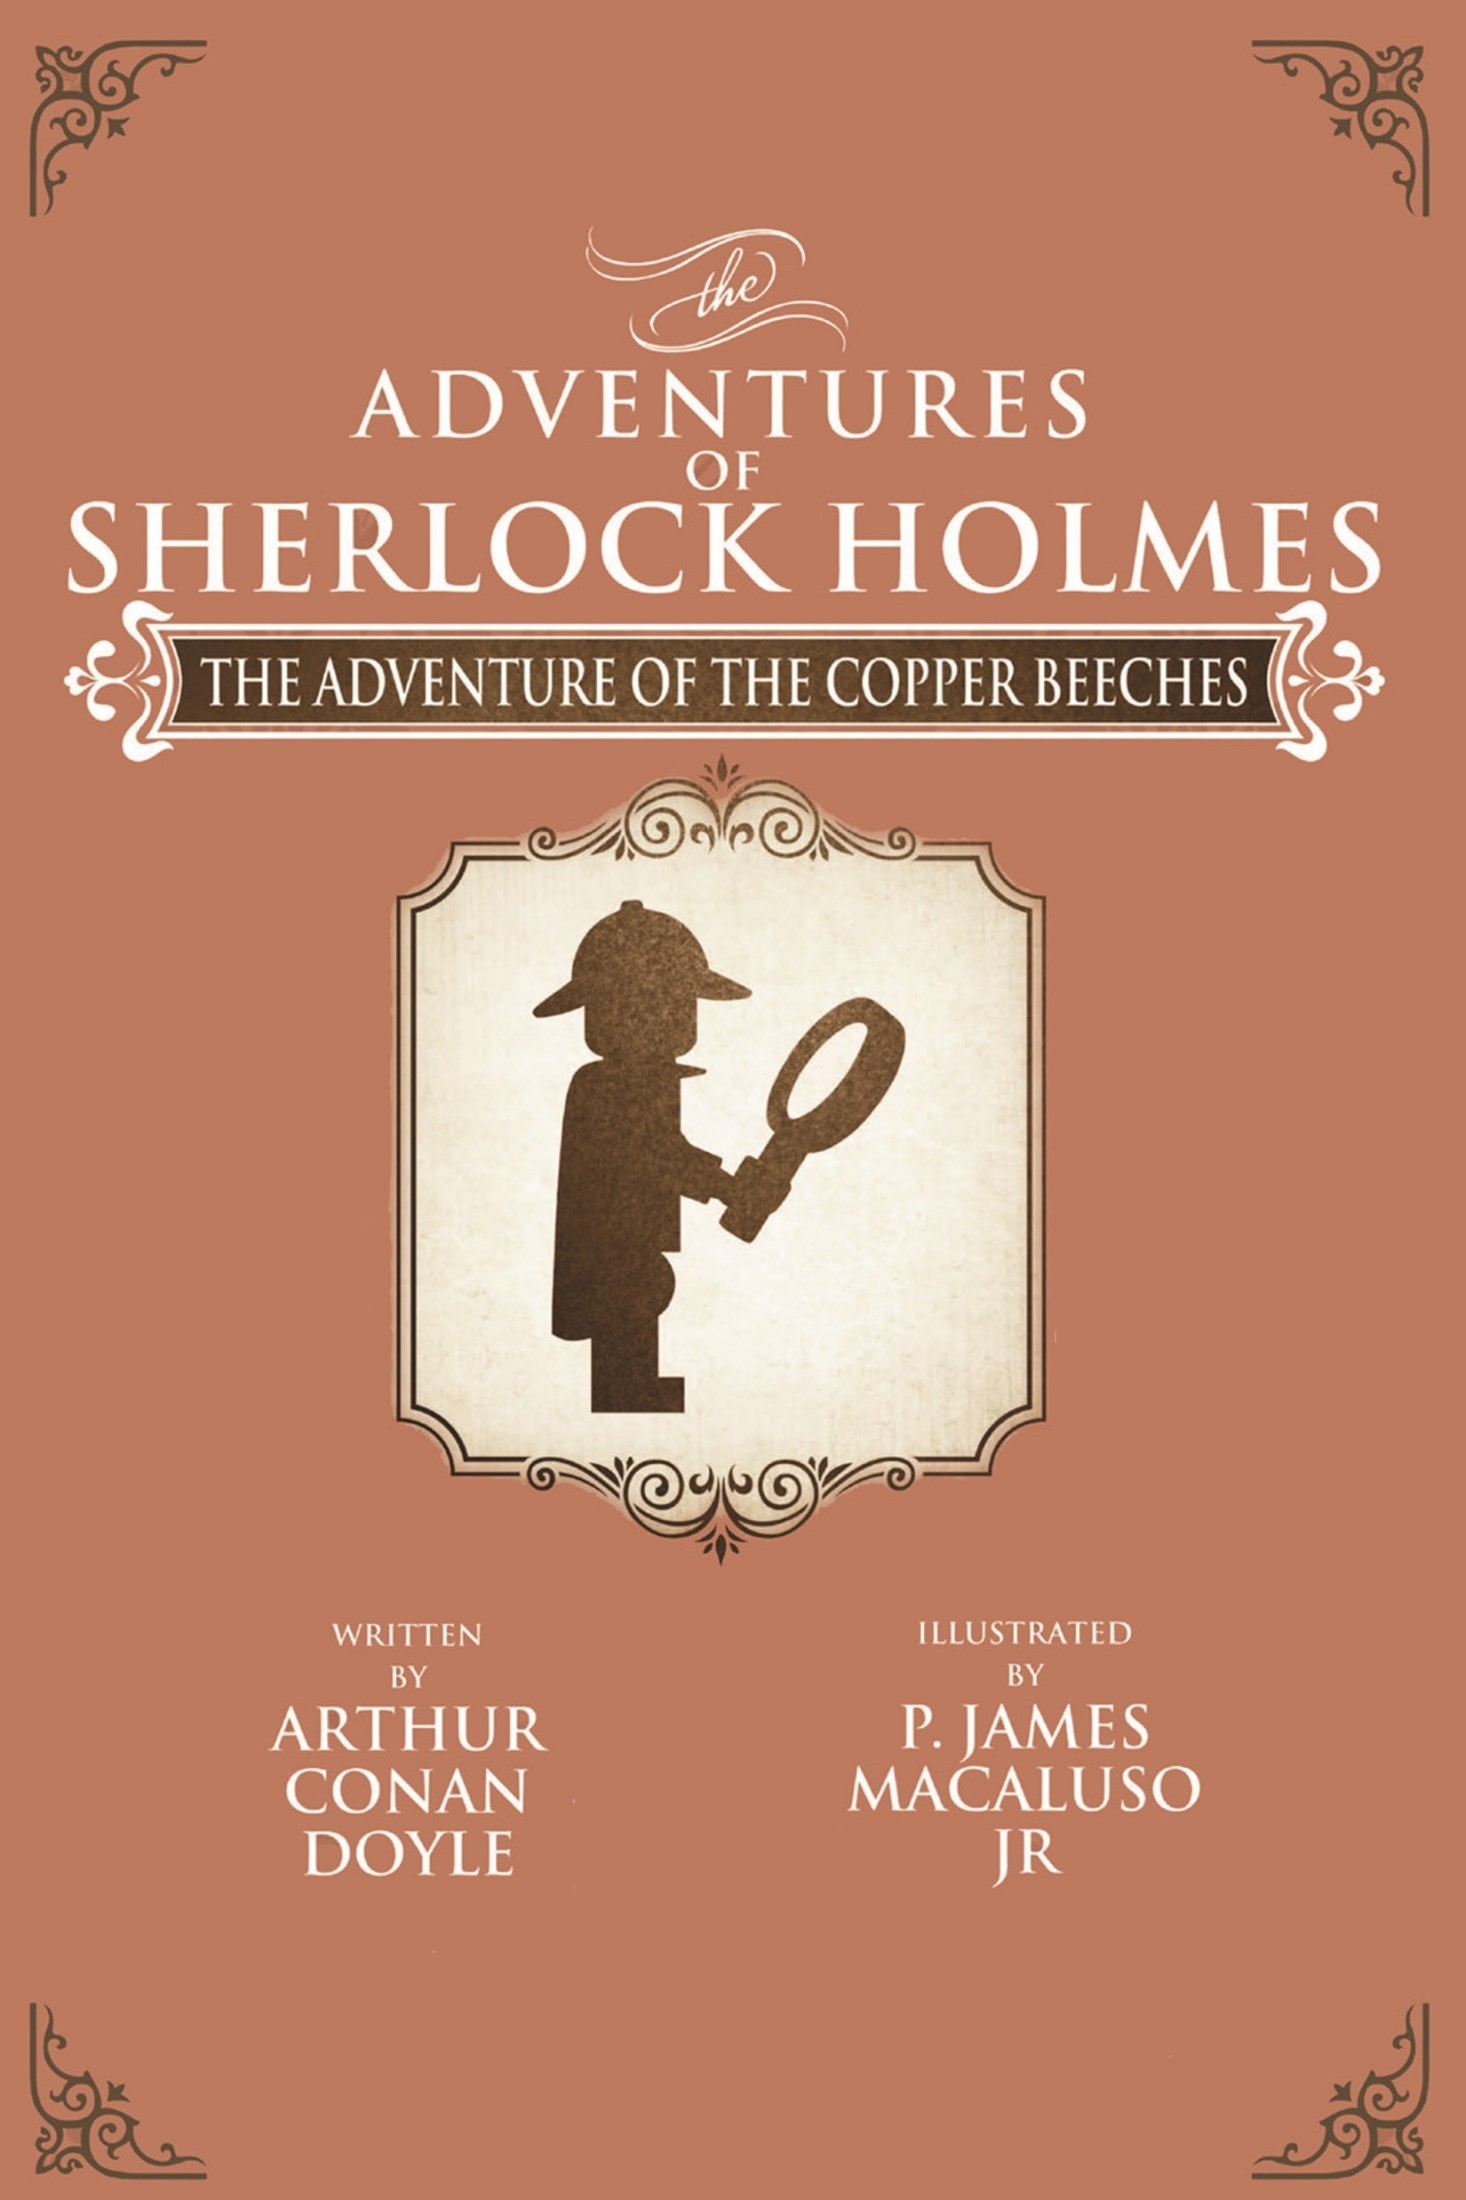 The Adventure of the Copper Beeches